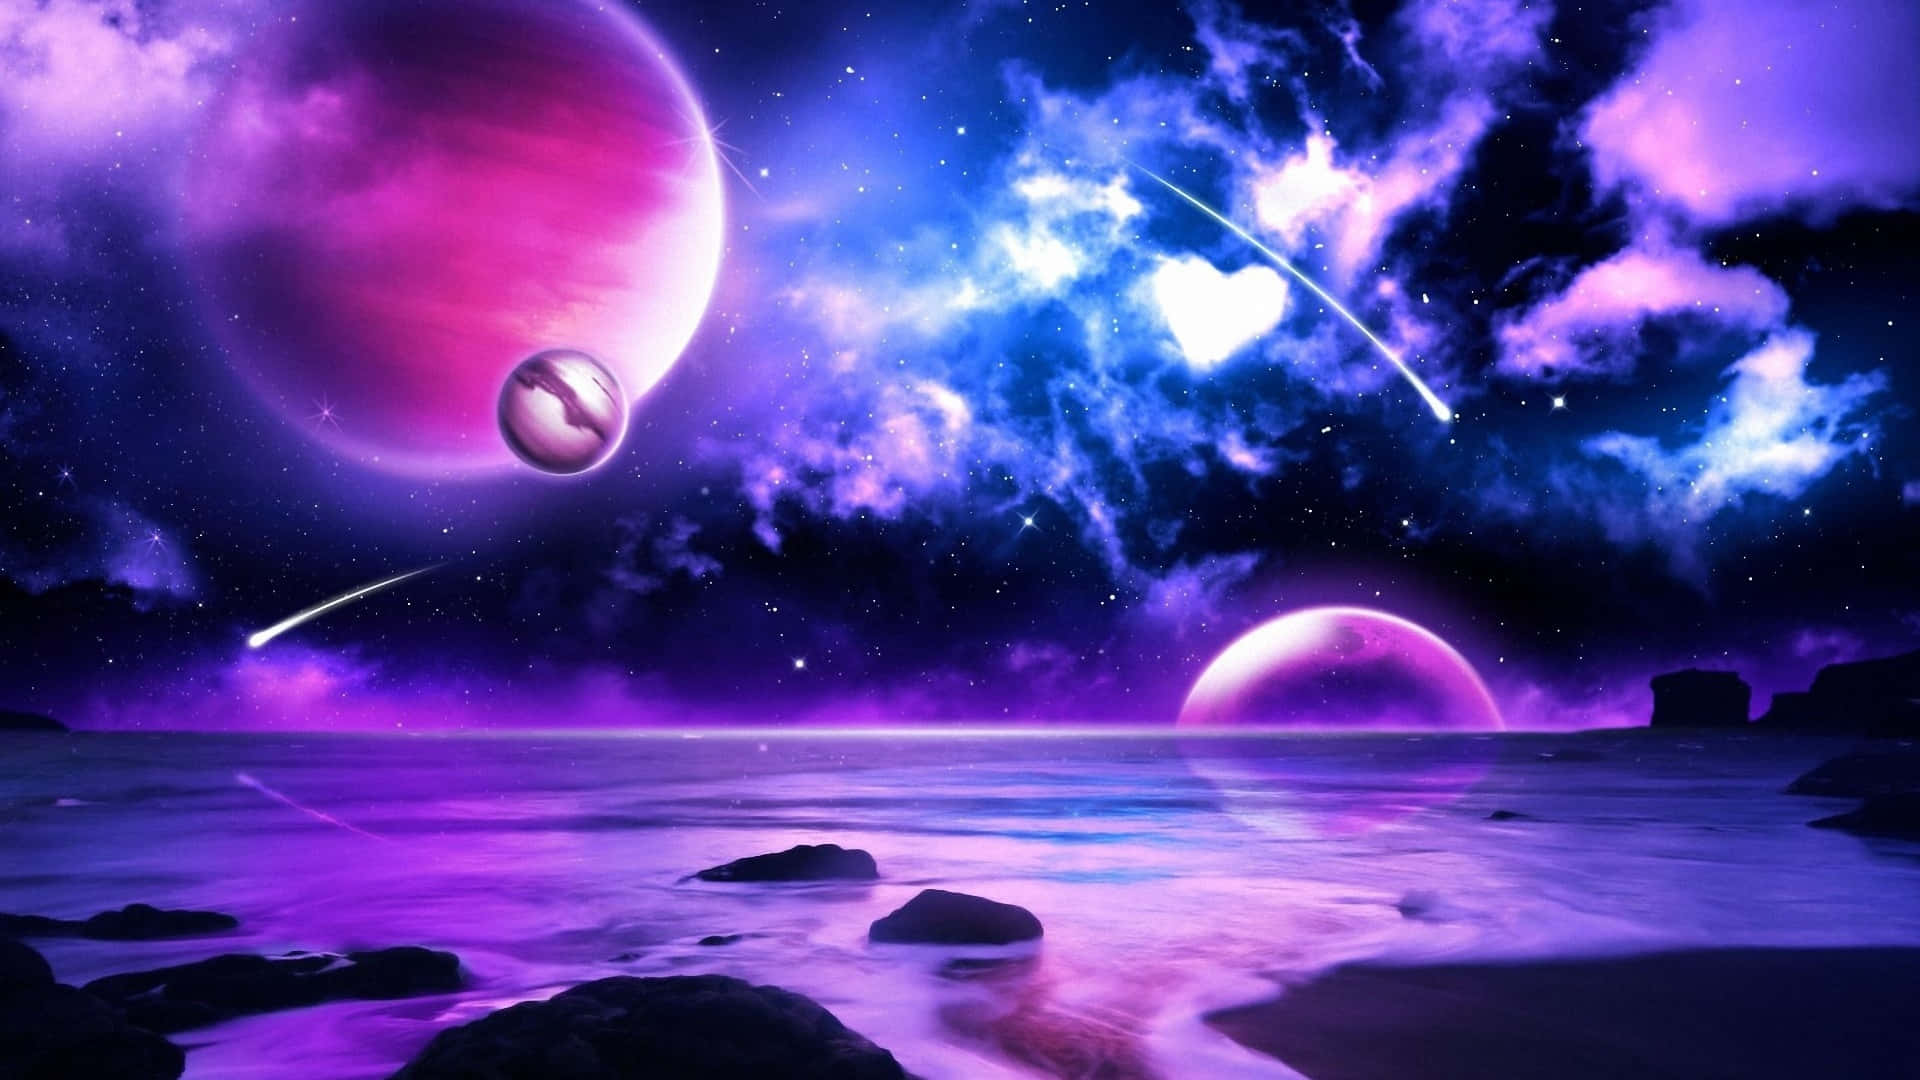 A Purple And Blue Space With Planets And Stars